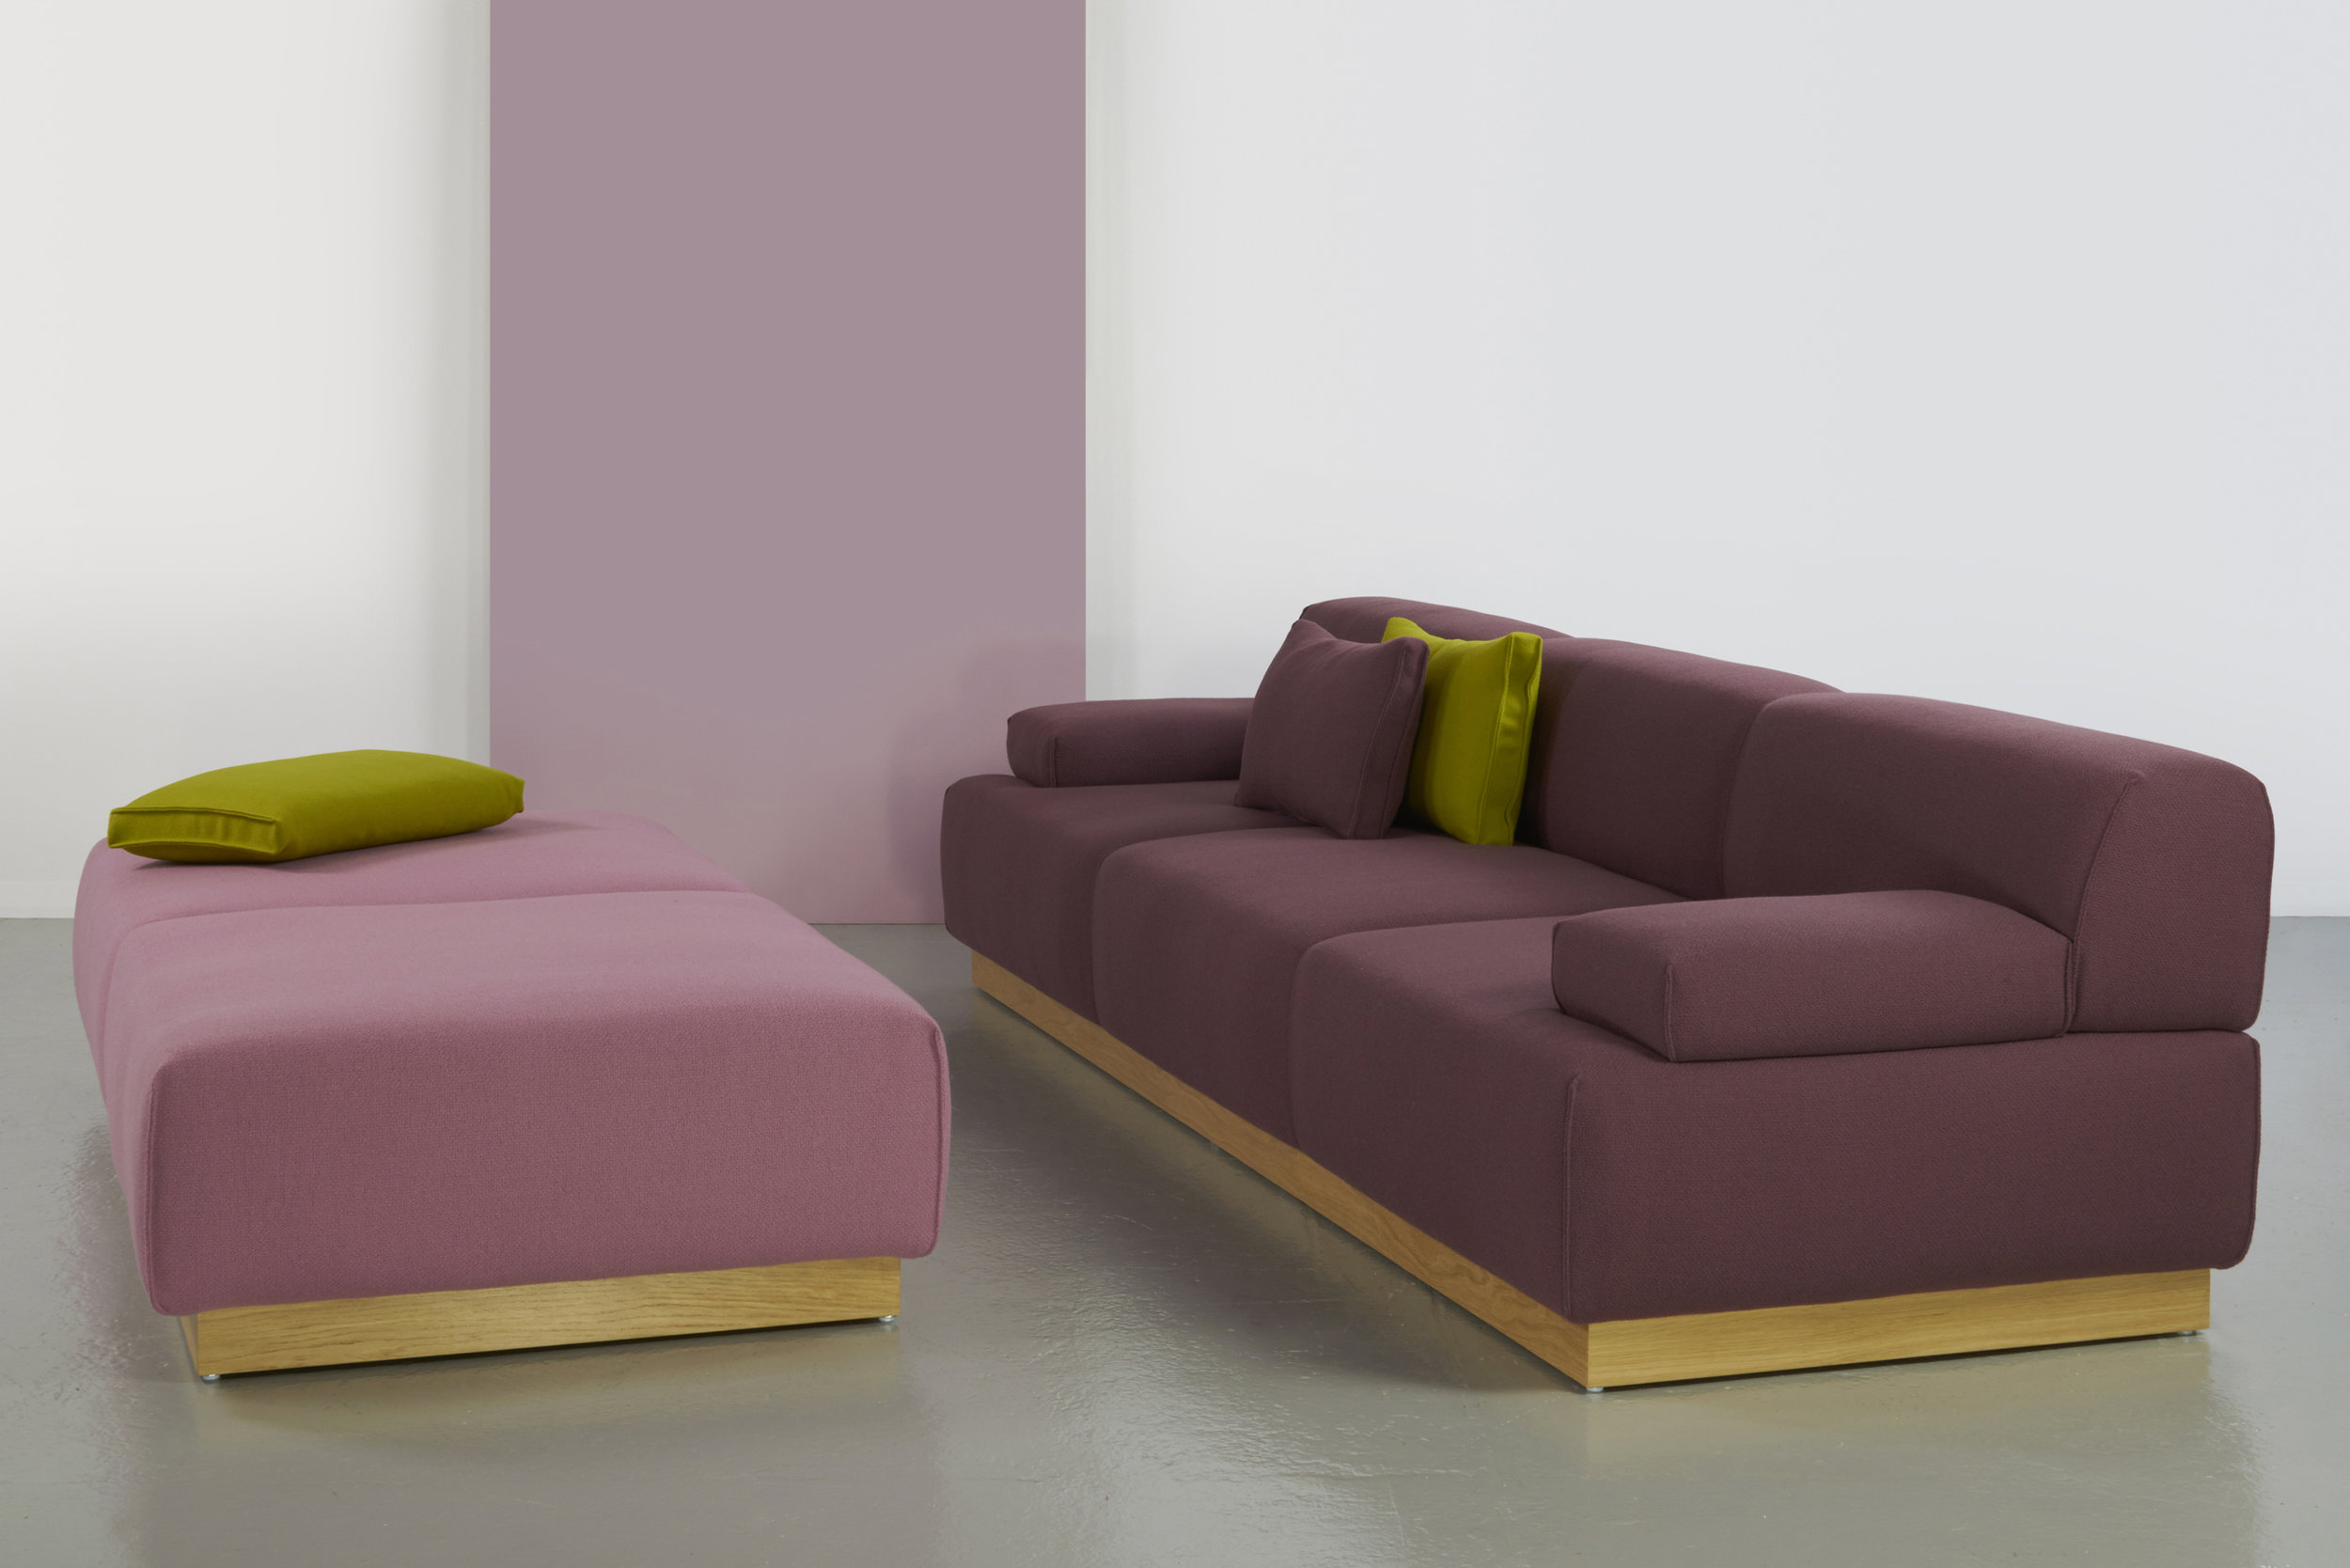 hm108s and hm108y scatter cushions with hm108b ottoman.jpg